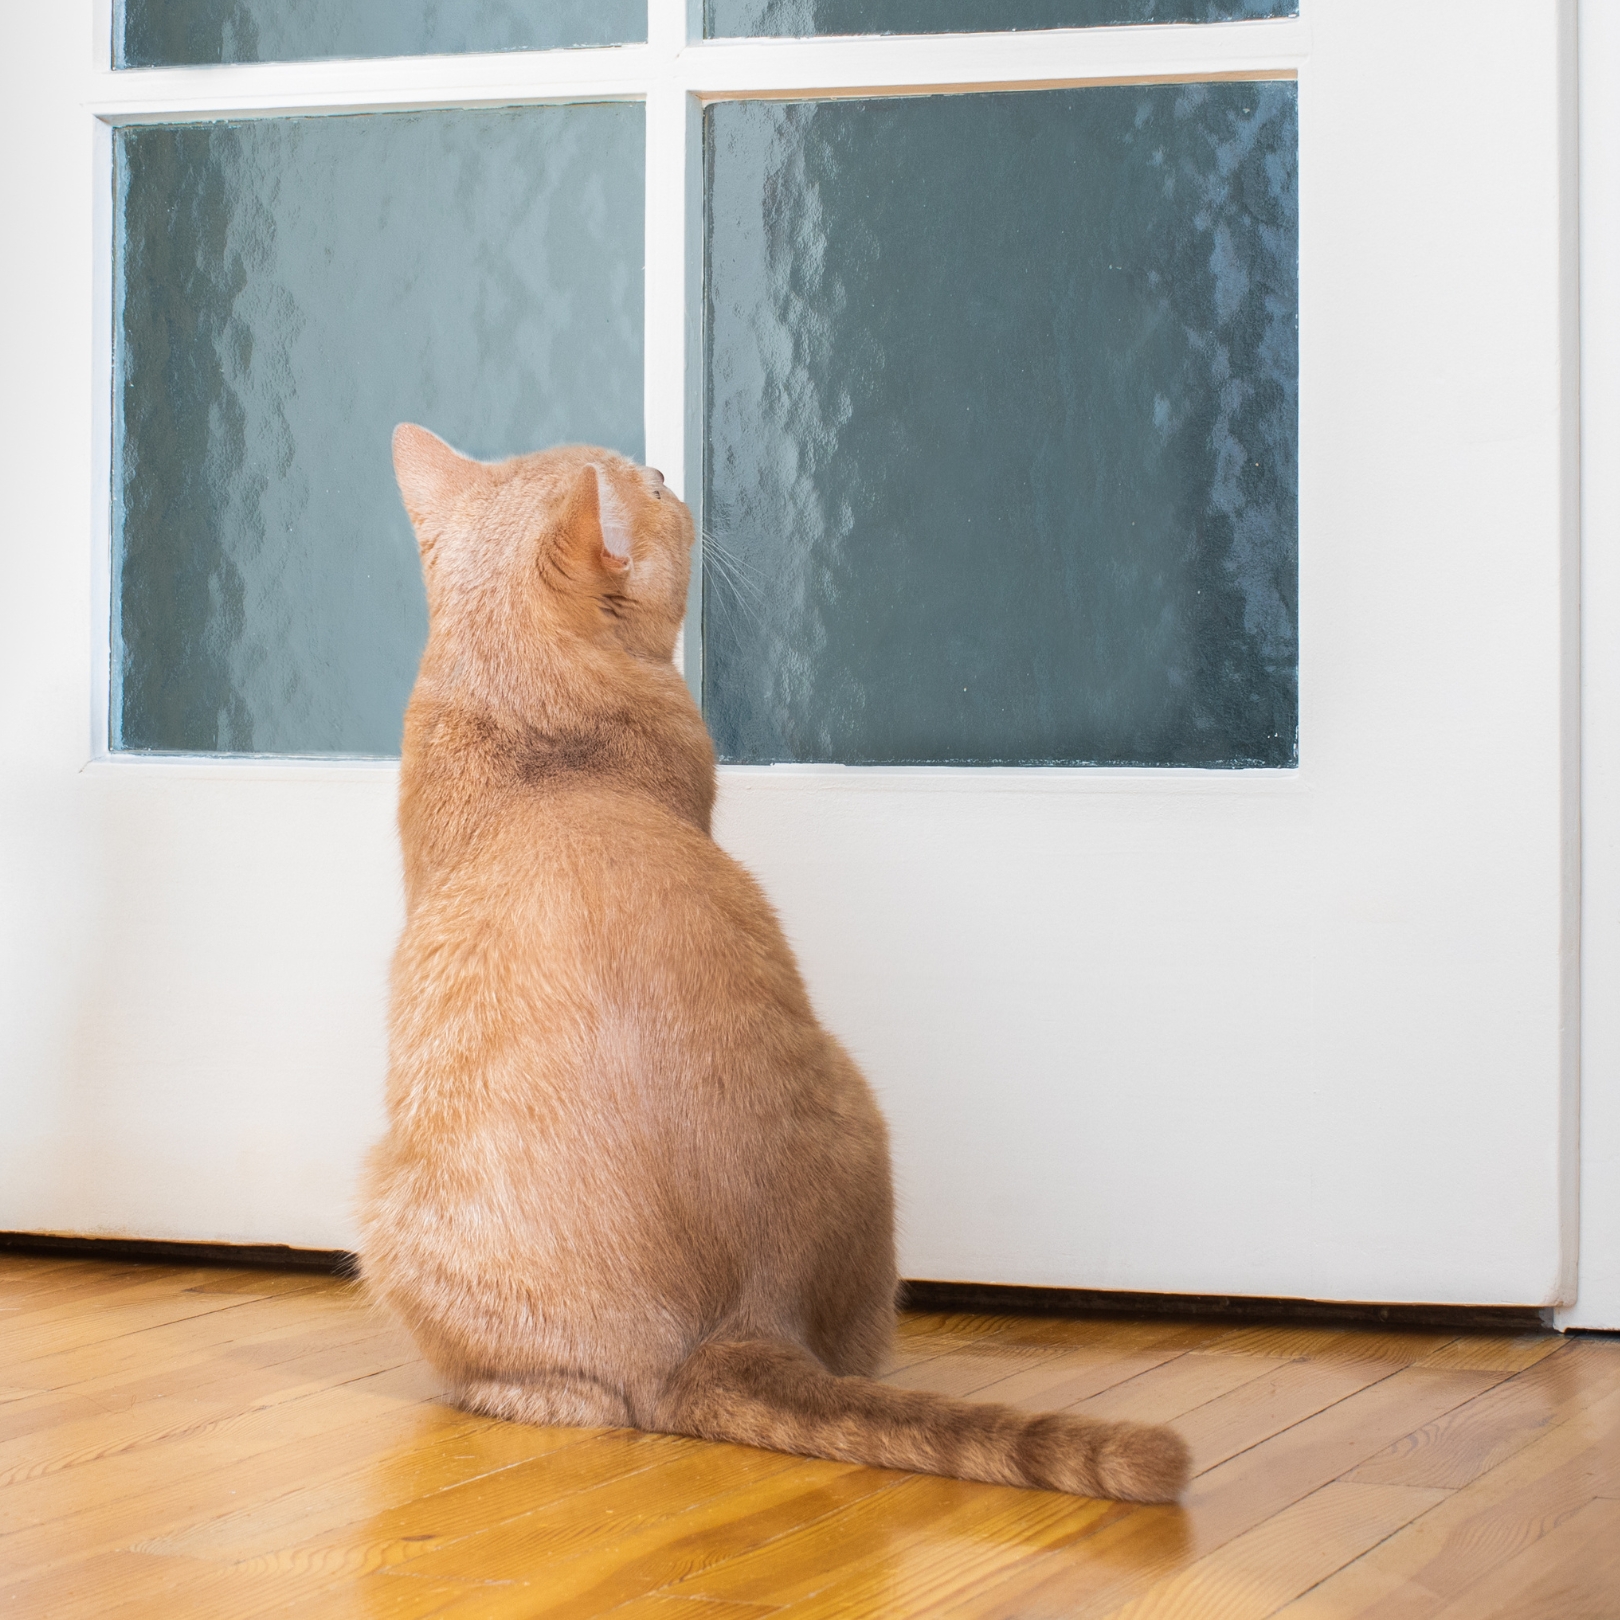 Leaving your pet home can lead to boredom